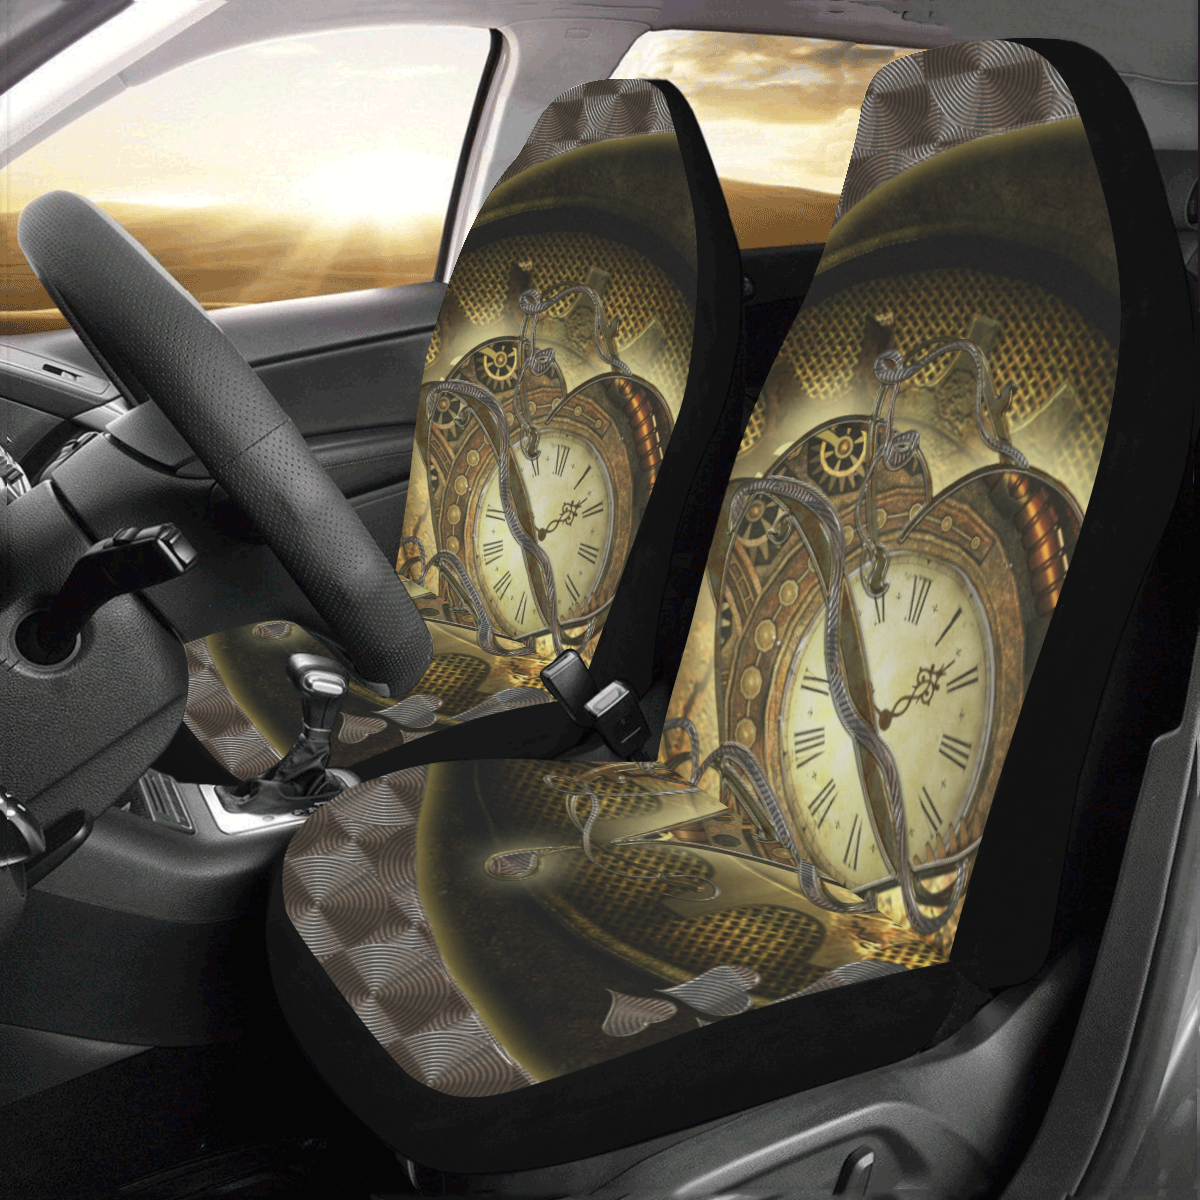 Awesome steampunk heart Car Seat Covers (Set of 2)